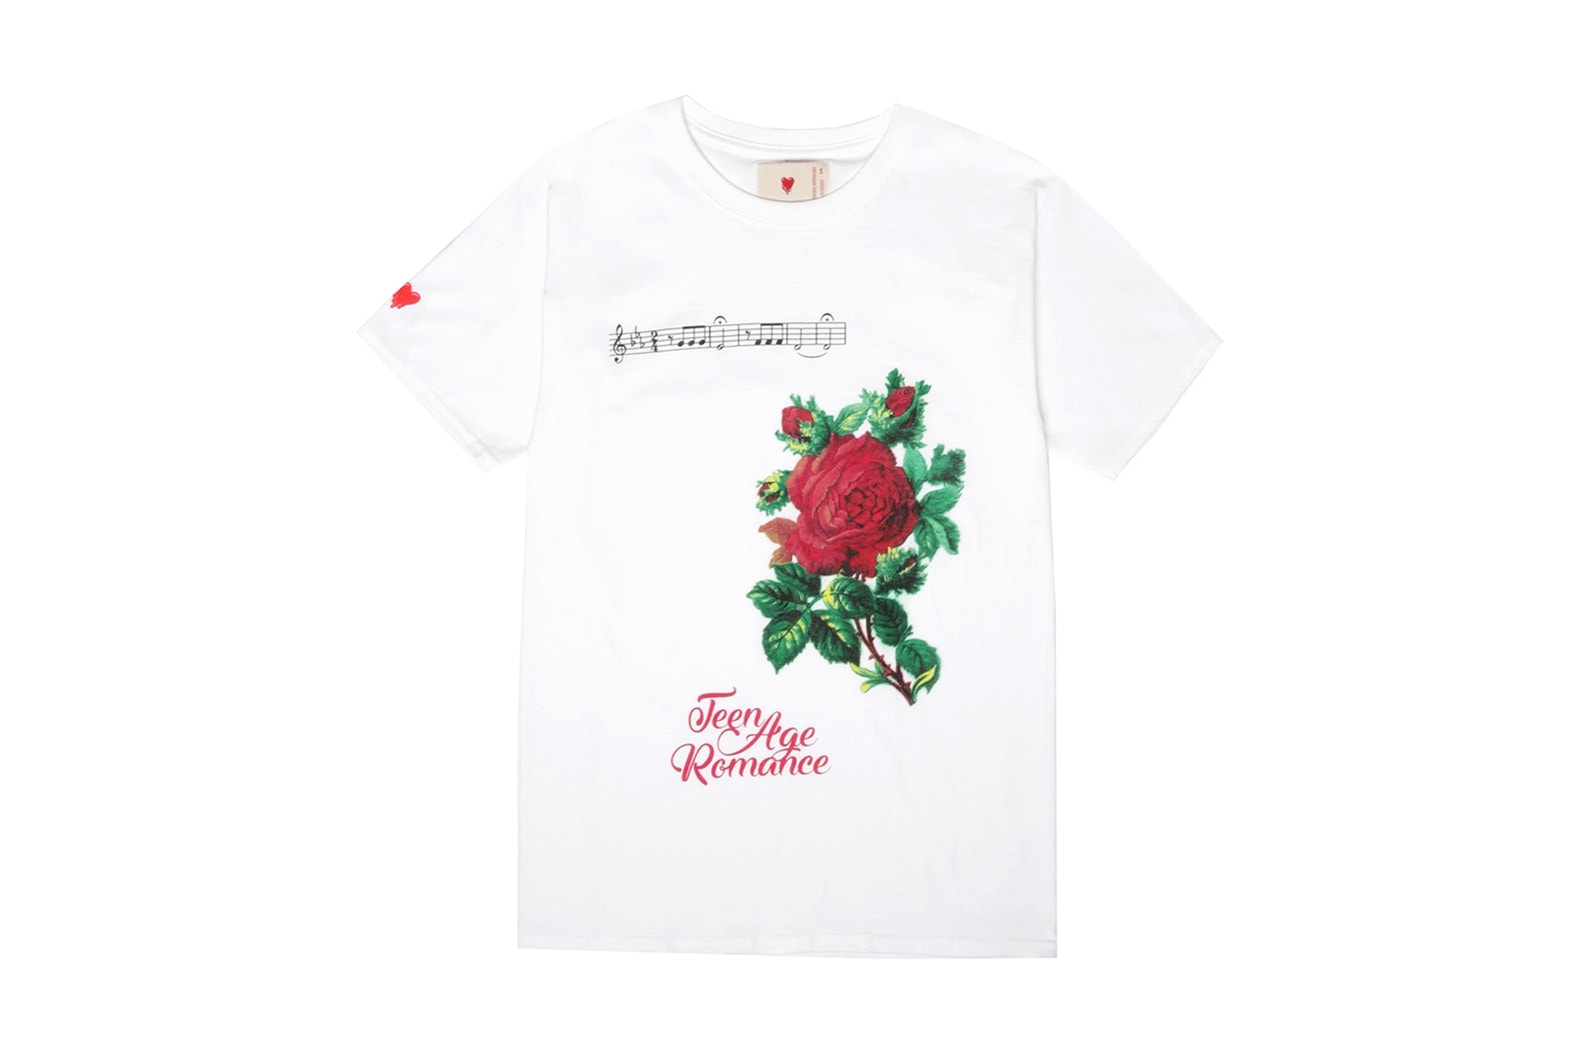 Emotionally Unavailable Dover Street Market Exclusive Collection